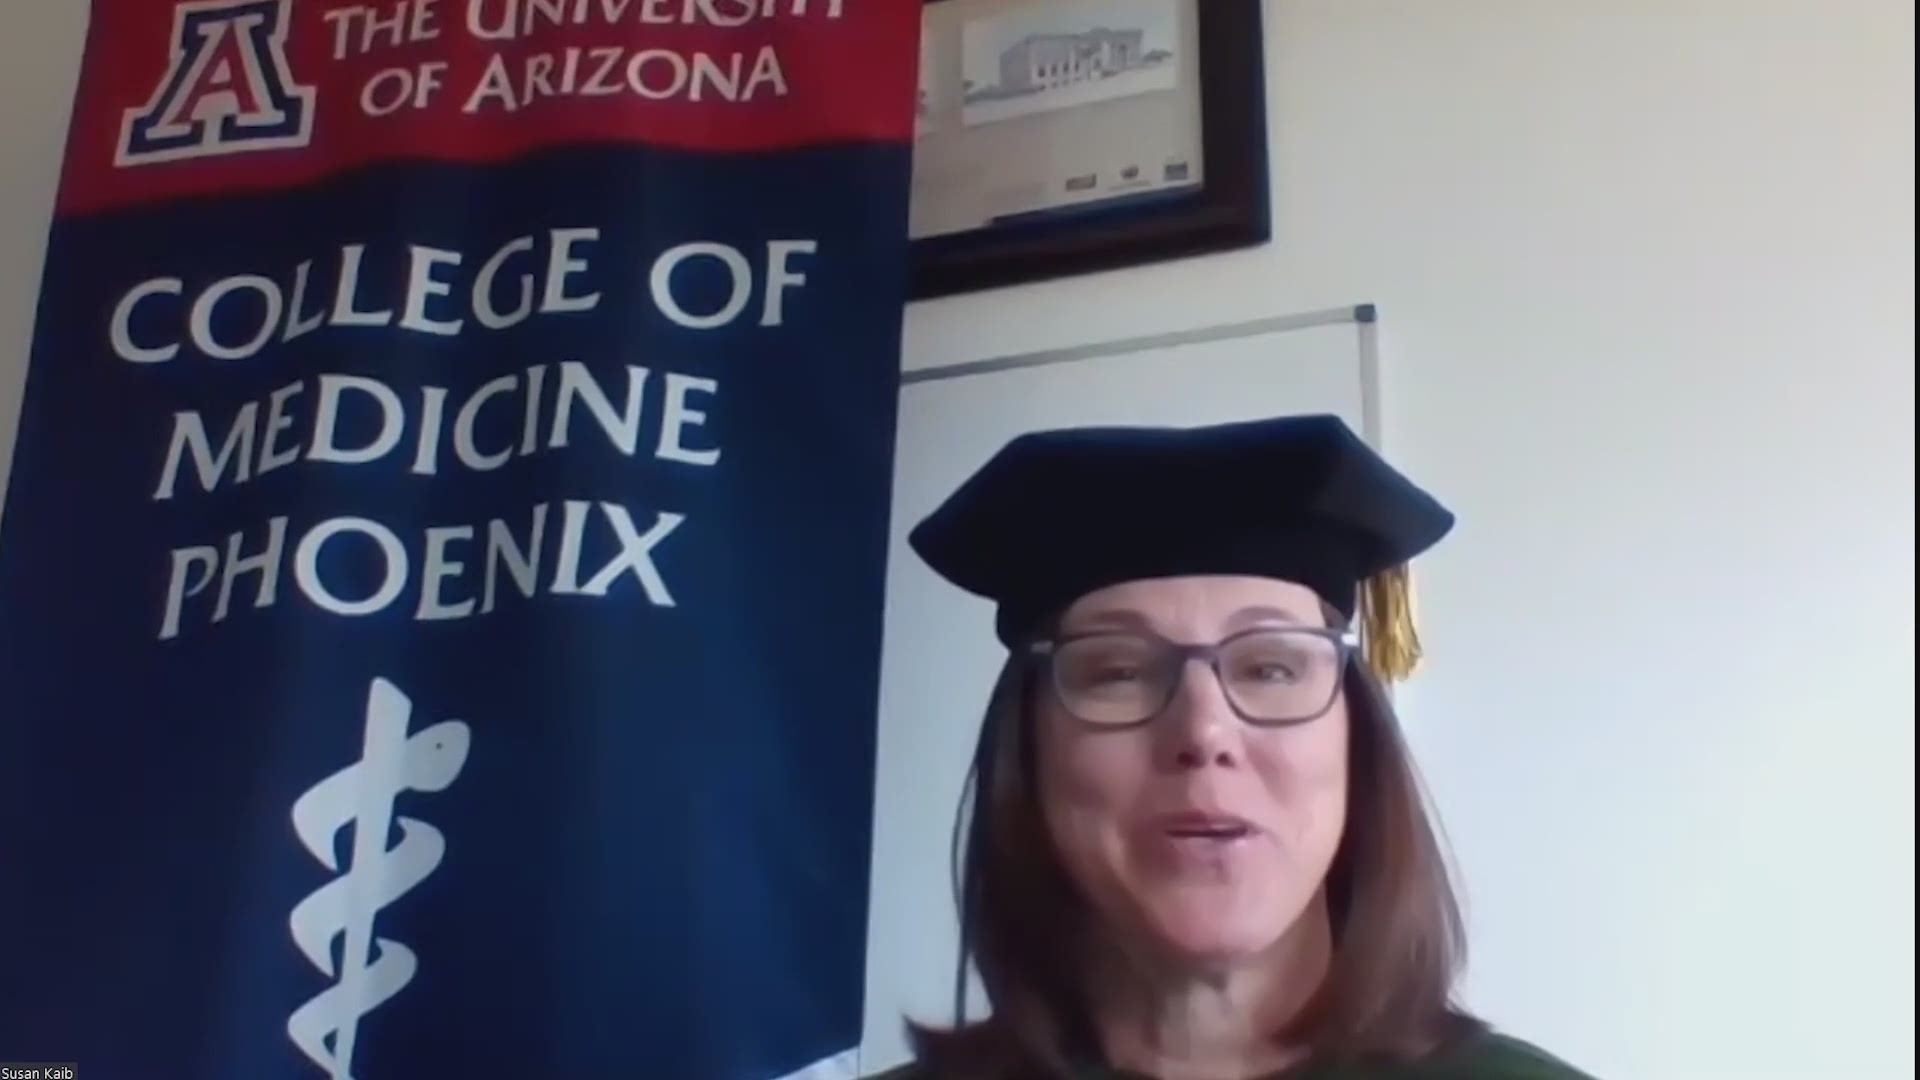 The University of Arizona College of Medicine hosted it first virtual commencement ceremony of 93 newly minted Physicians.